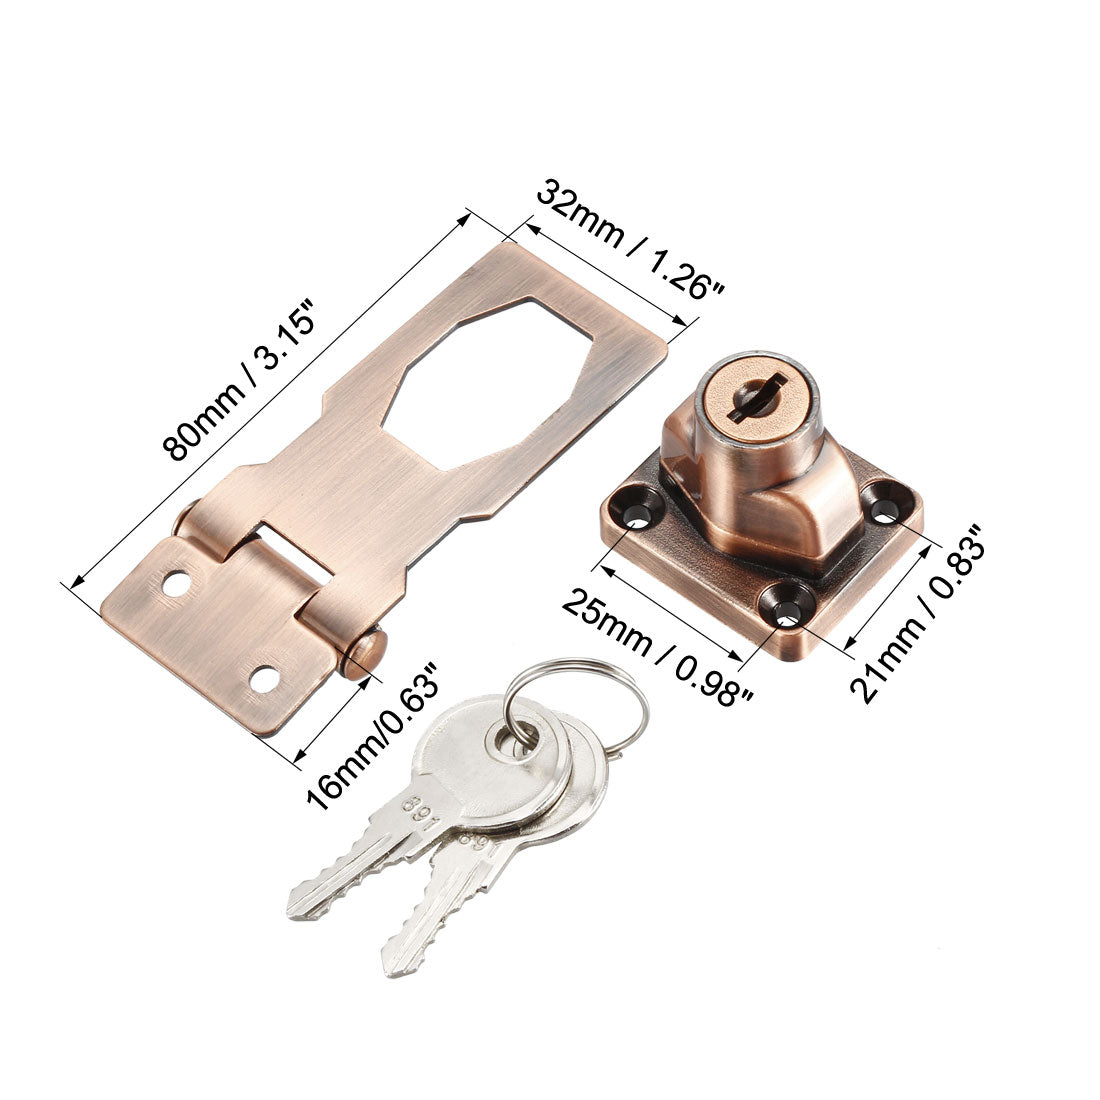 uxcell Uxcell Keyed Hasp Lock 80mm Twist Knob Keyed Locking Hasp for Door Cabinet Keyed Different Red Copper Tone